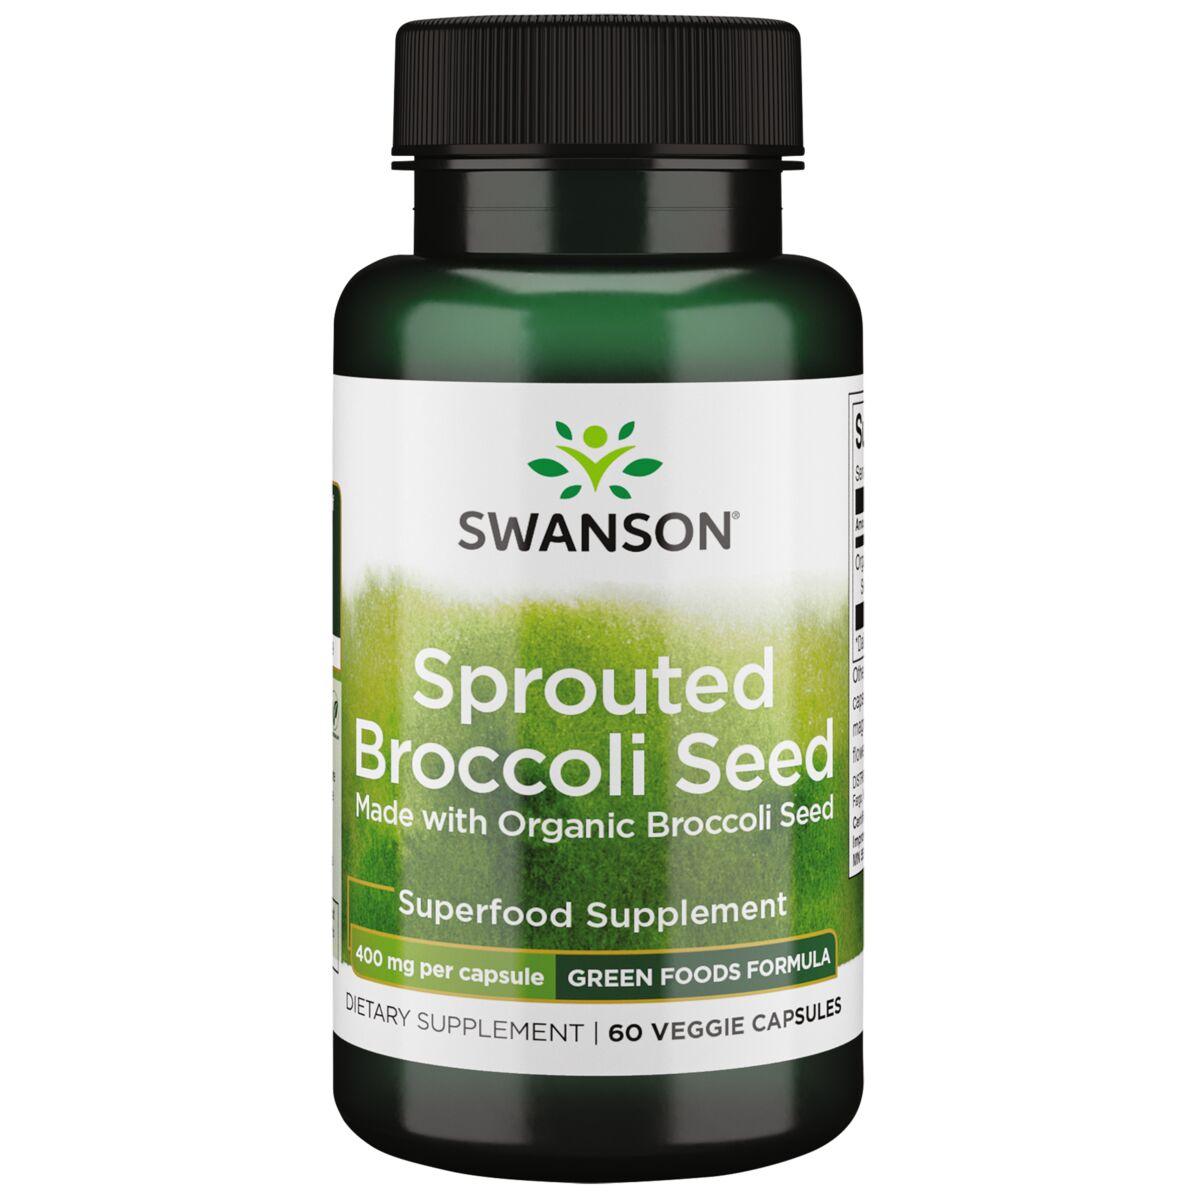 Swanson GreenFoods Formulas Sprouted Broccoli Seed - Made with Organic Supplement Vitamin | 400 mg | 60 Veg Caps